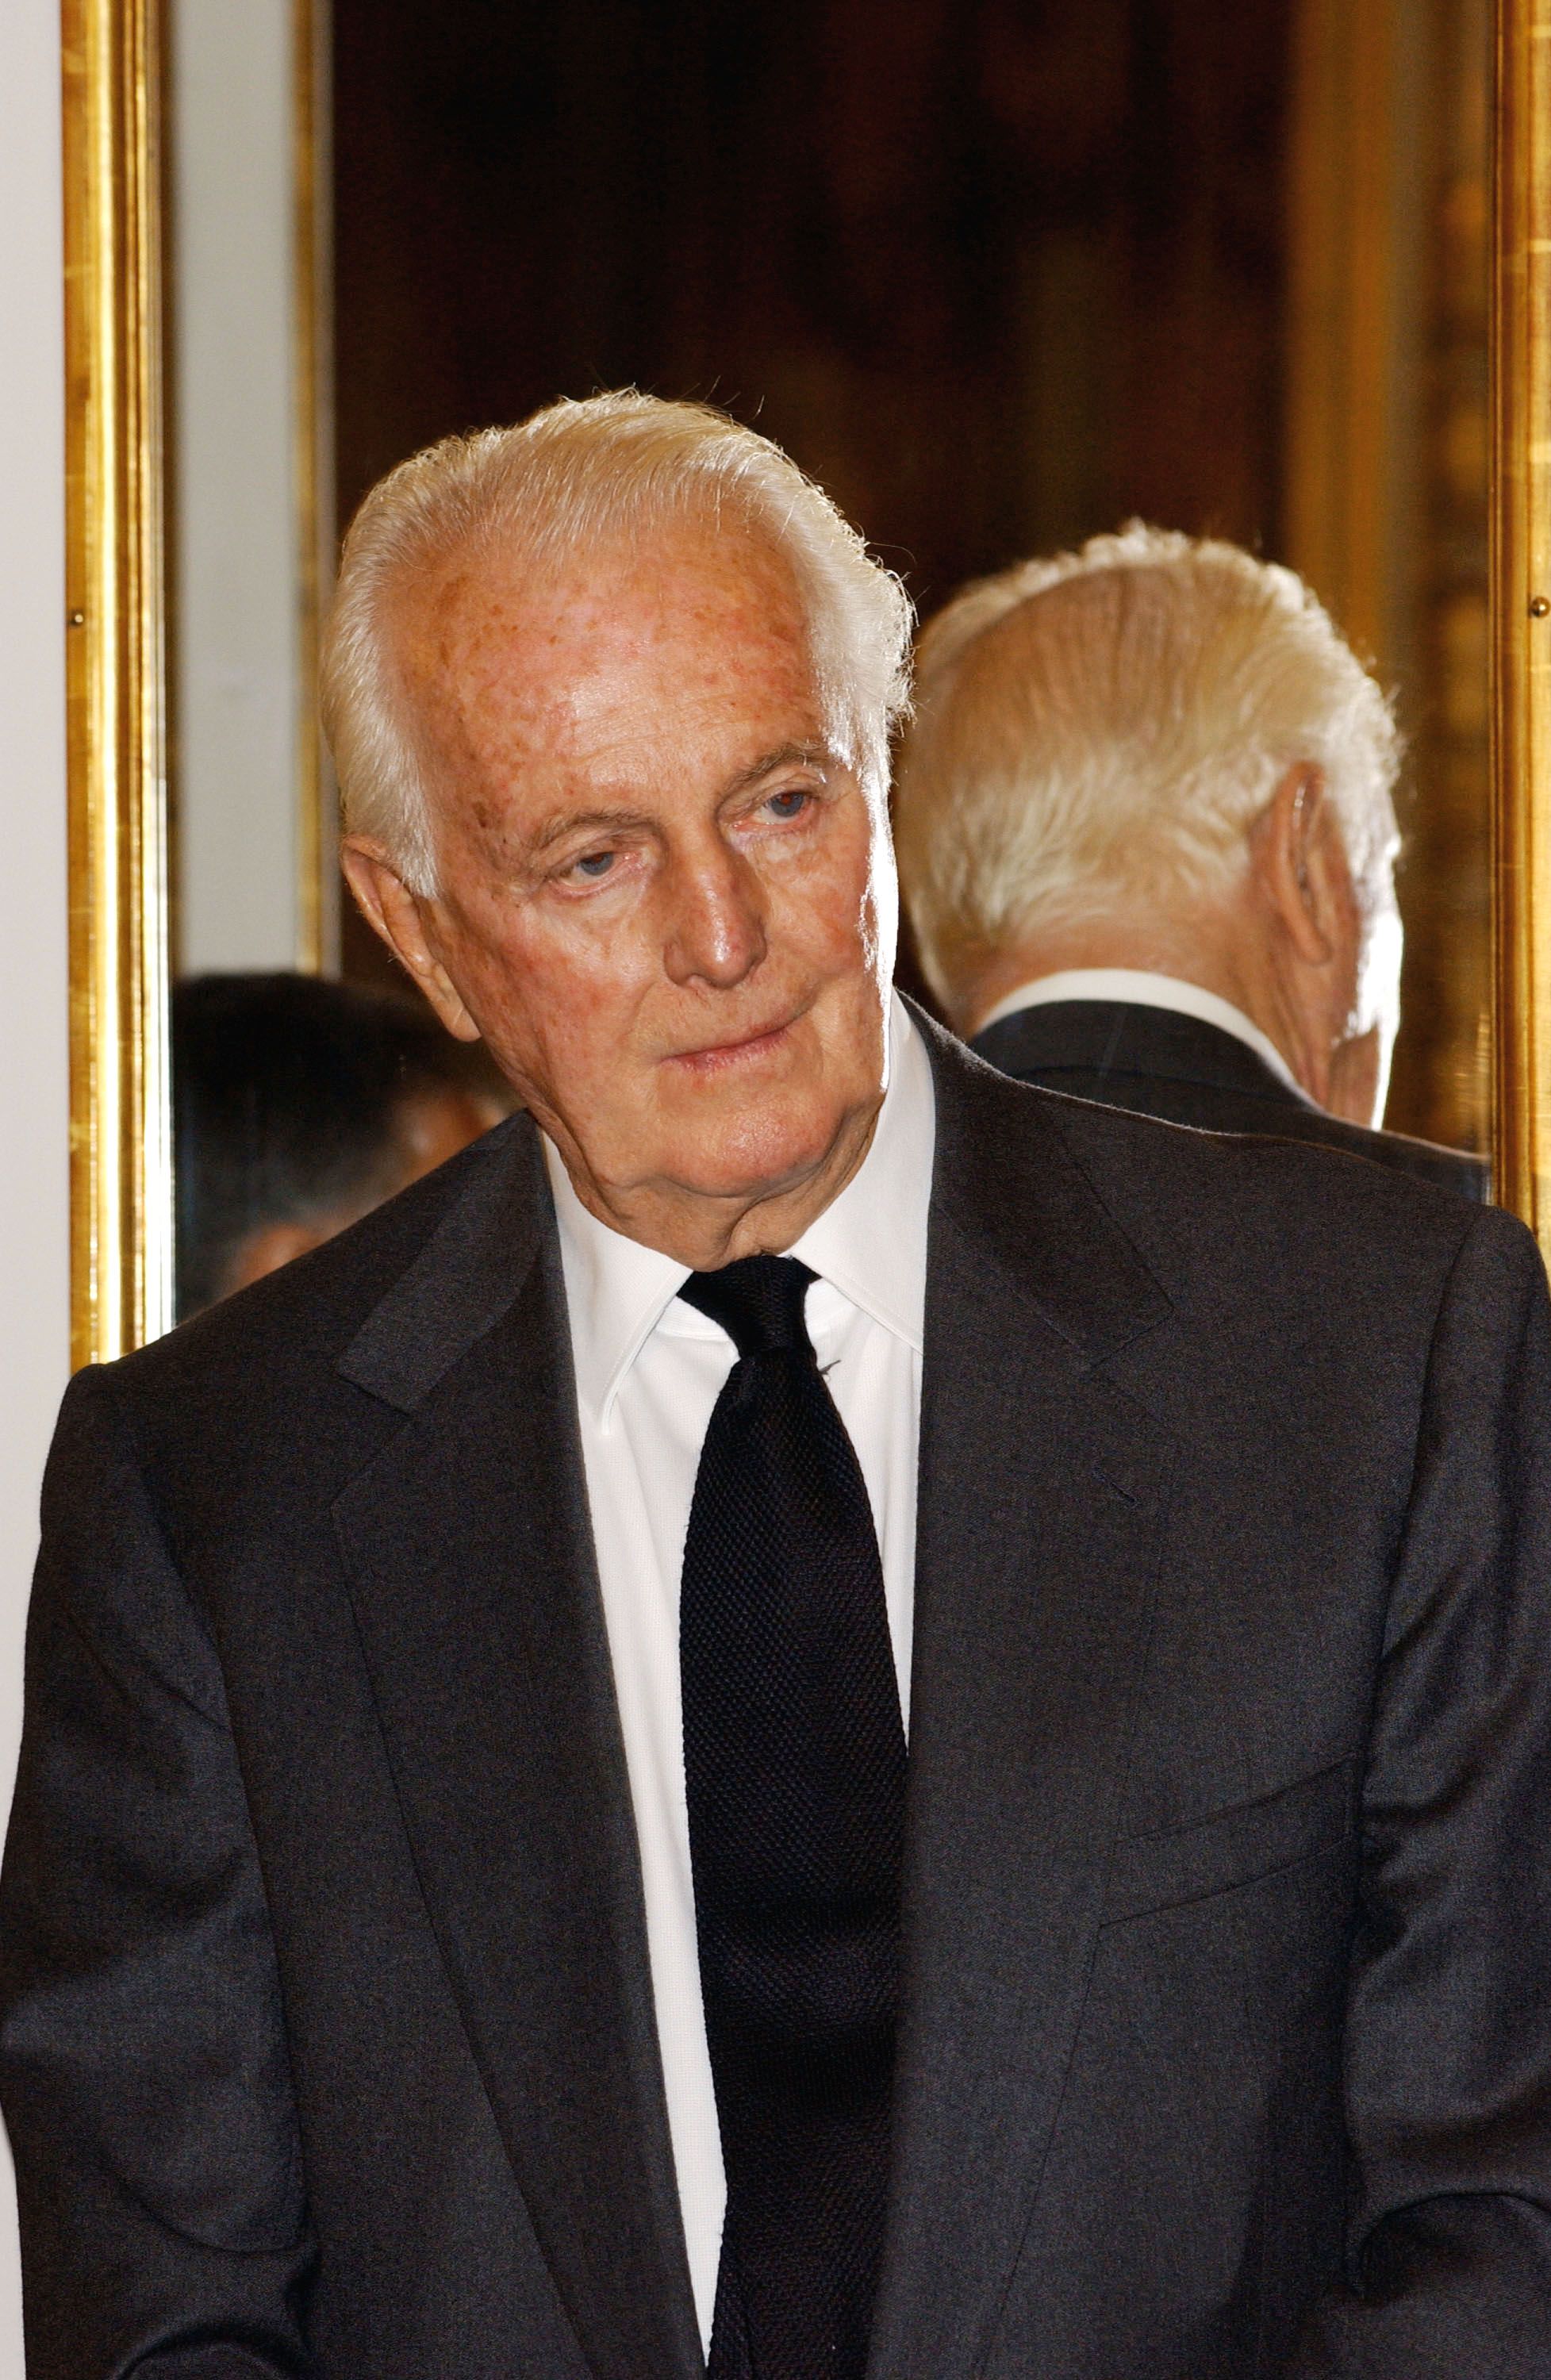 What Is French Fashion Designer Givenchy's Net Worth?